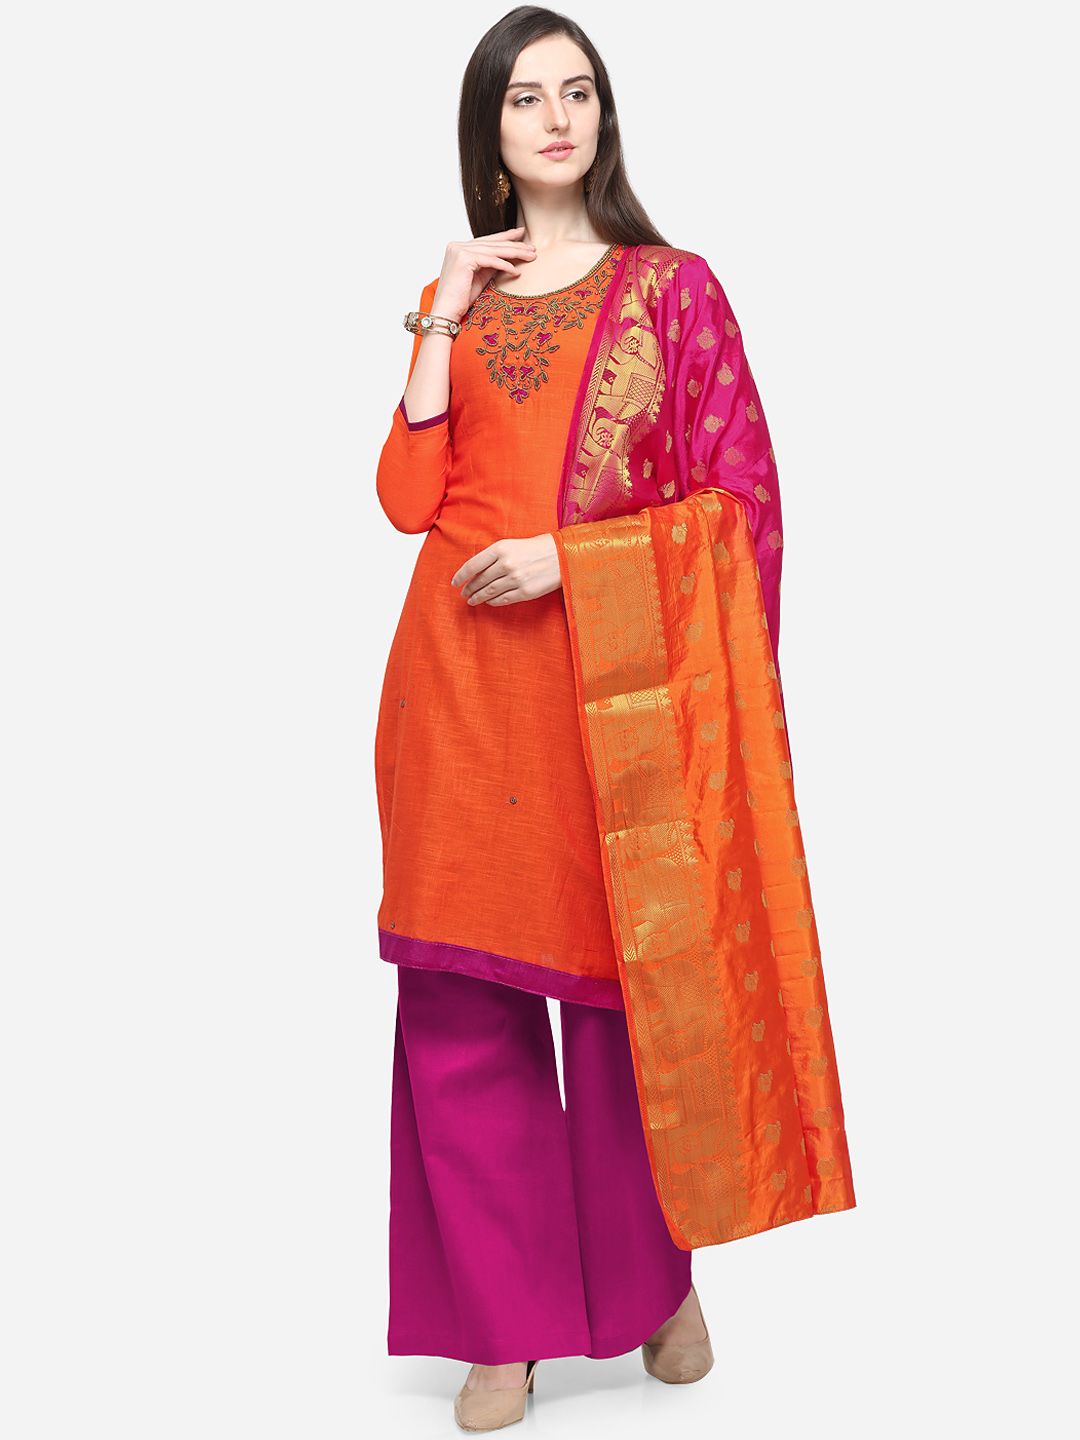 Blissta Orange & Pink Cotton Blend Unstitched Dress Material Price in India